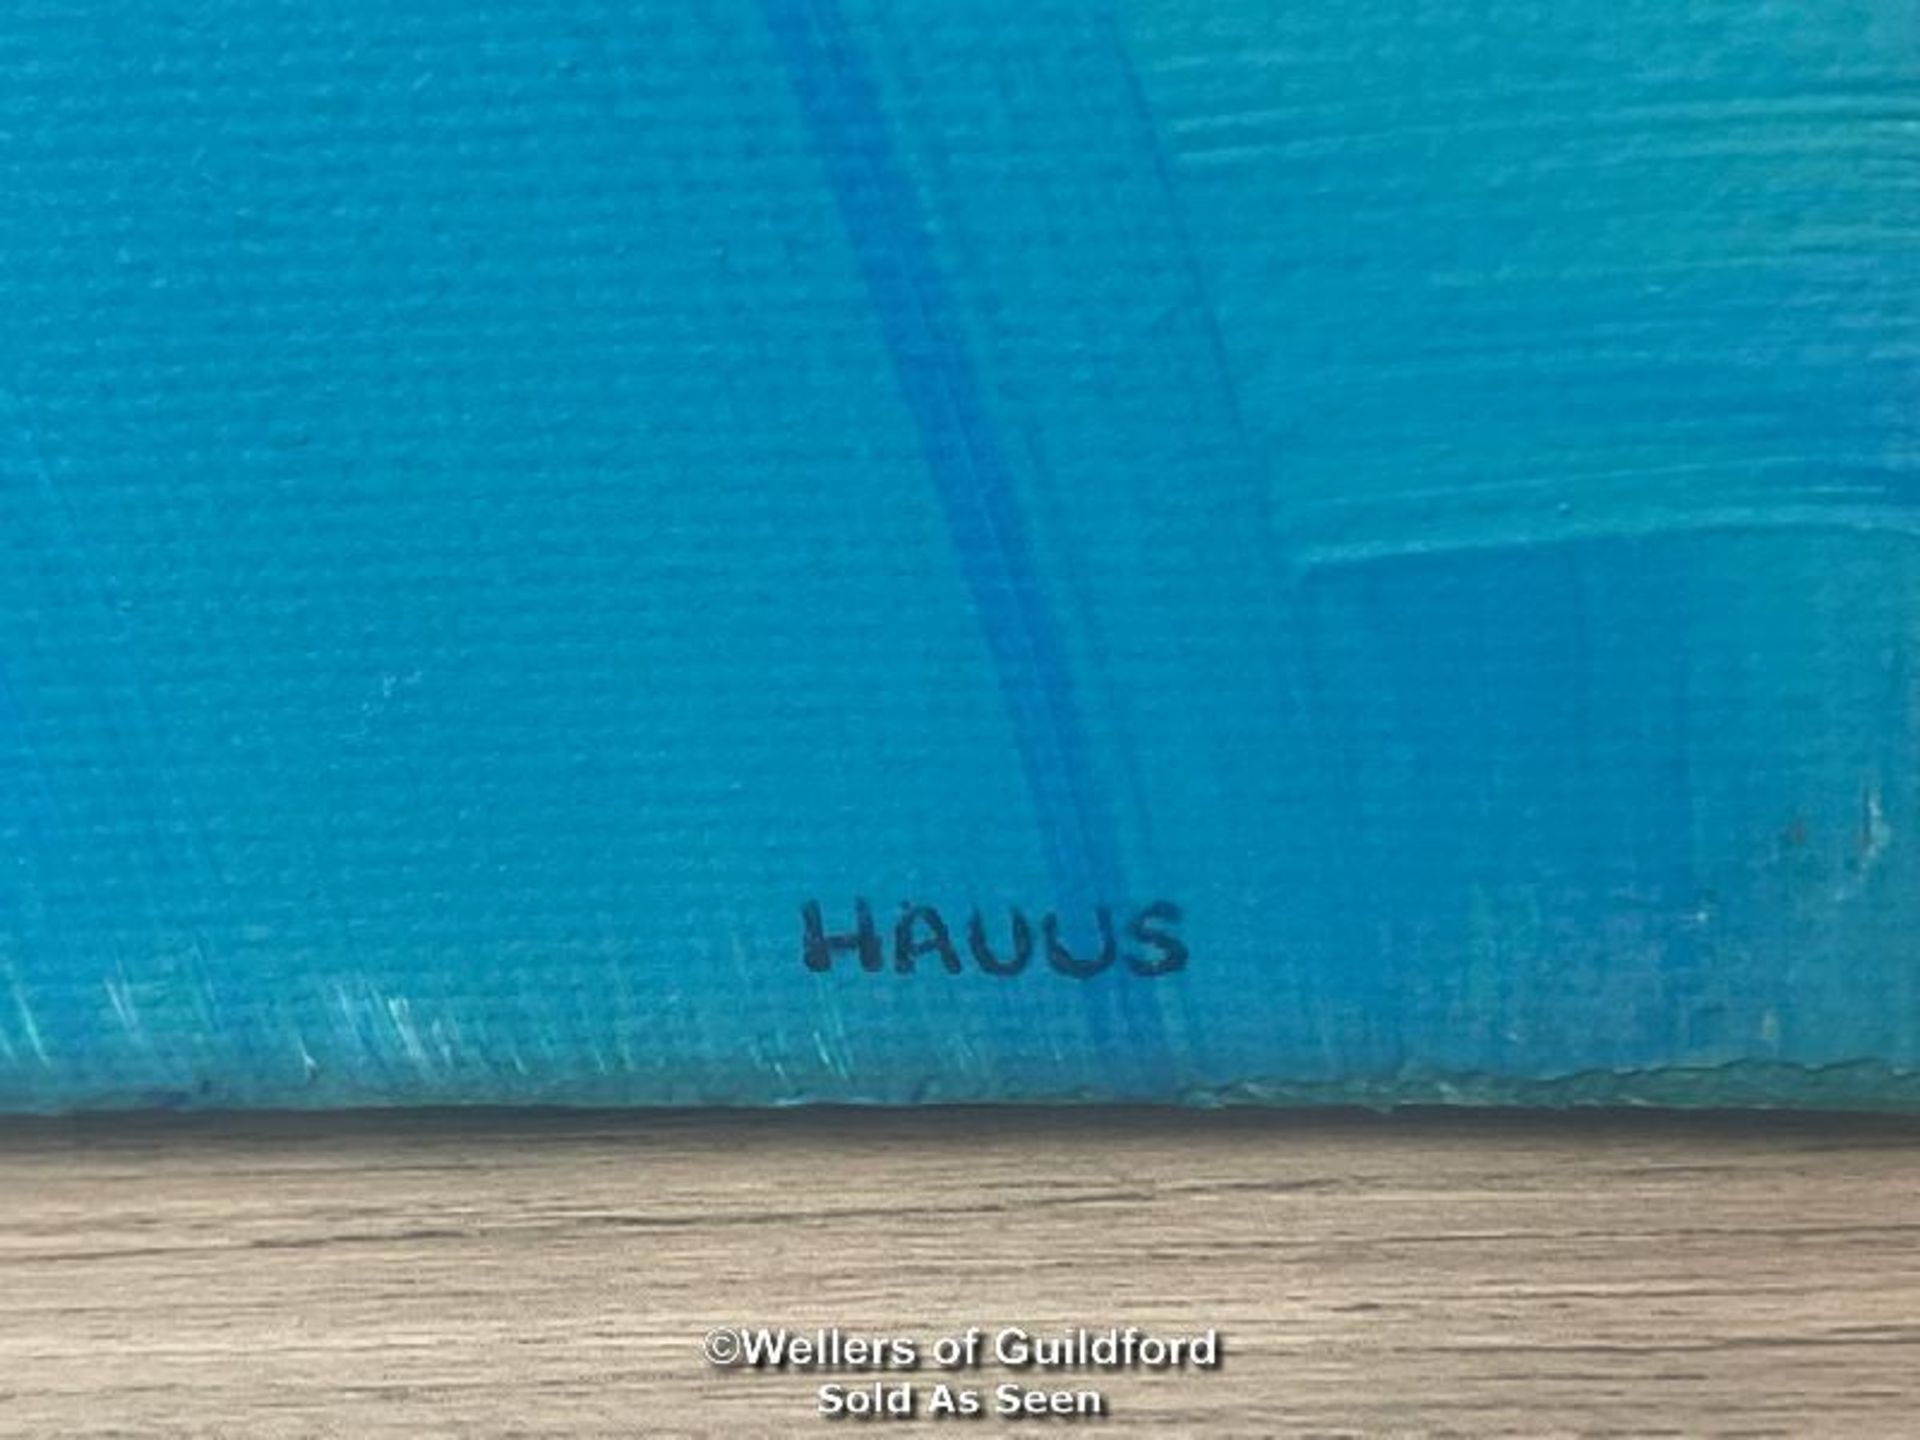 TWO ABSTRACT PAINTINGS, ACRYLIC ON CANVAS SIGNED "HAUUS", 50 X 39.5CM - Image 5 of 5